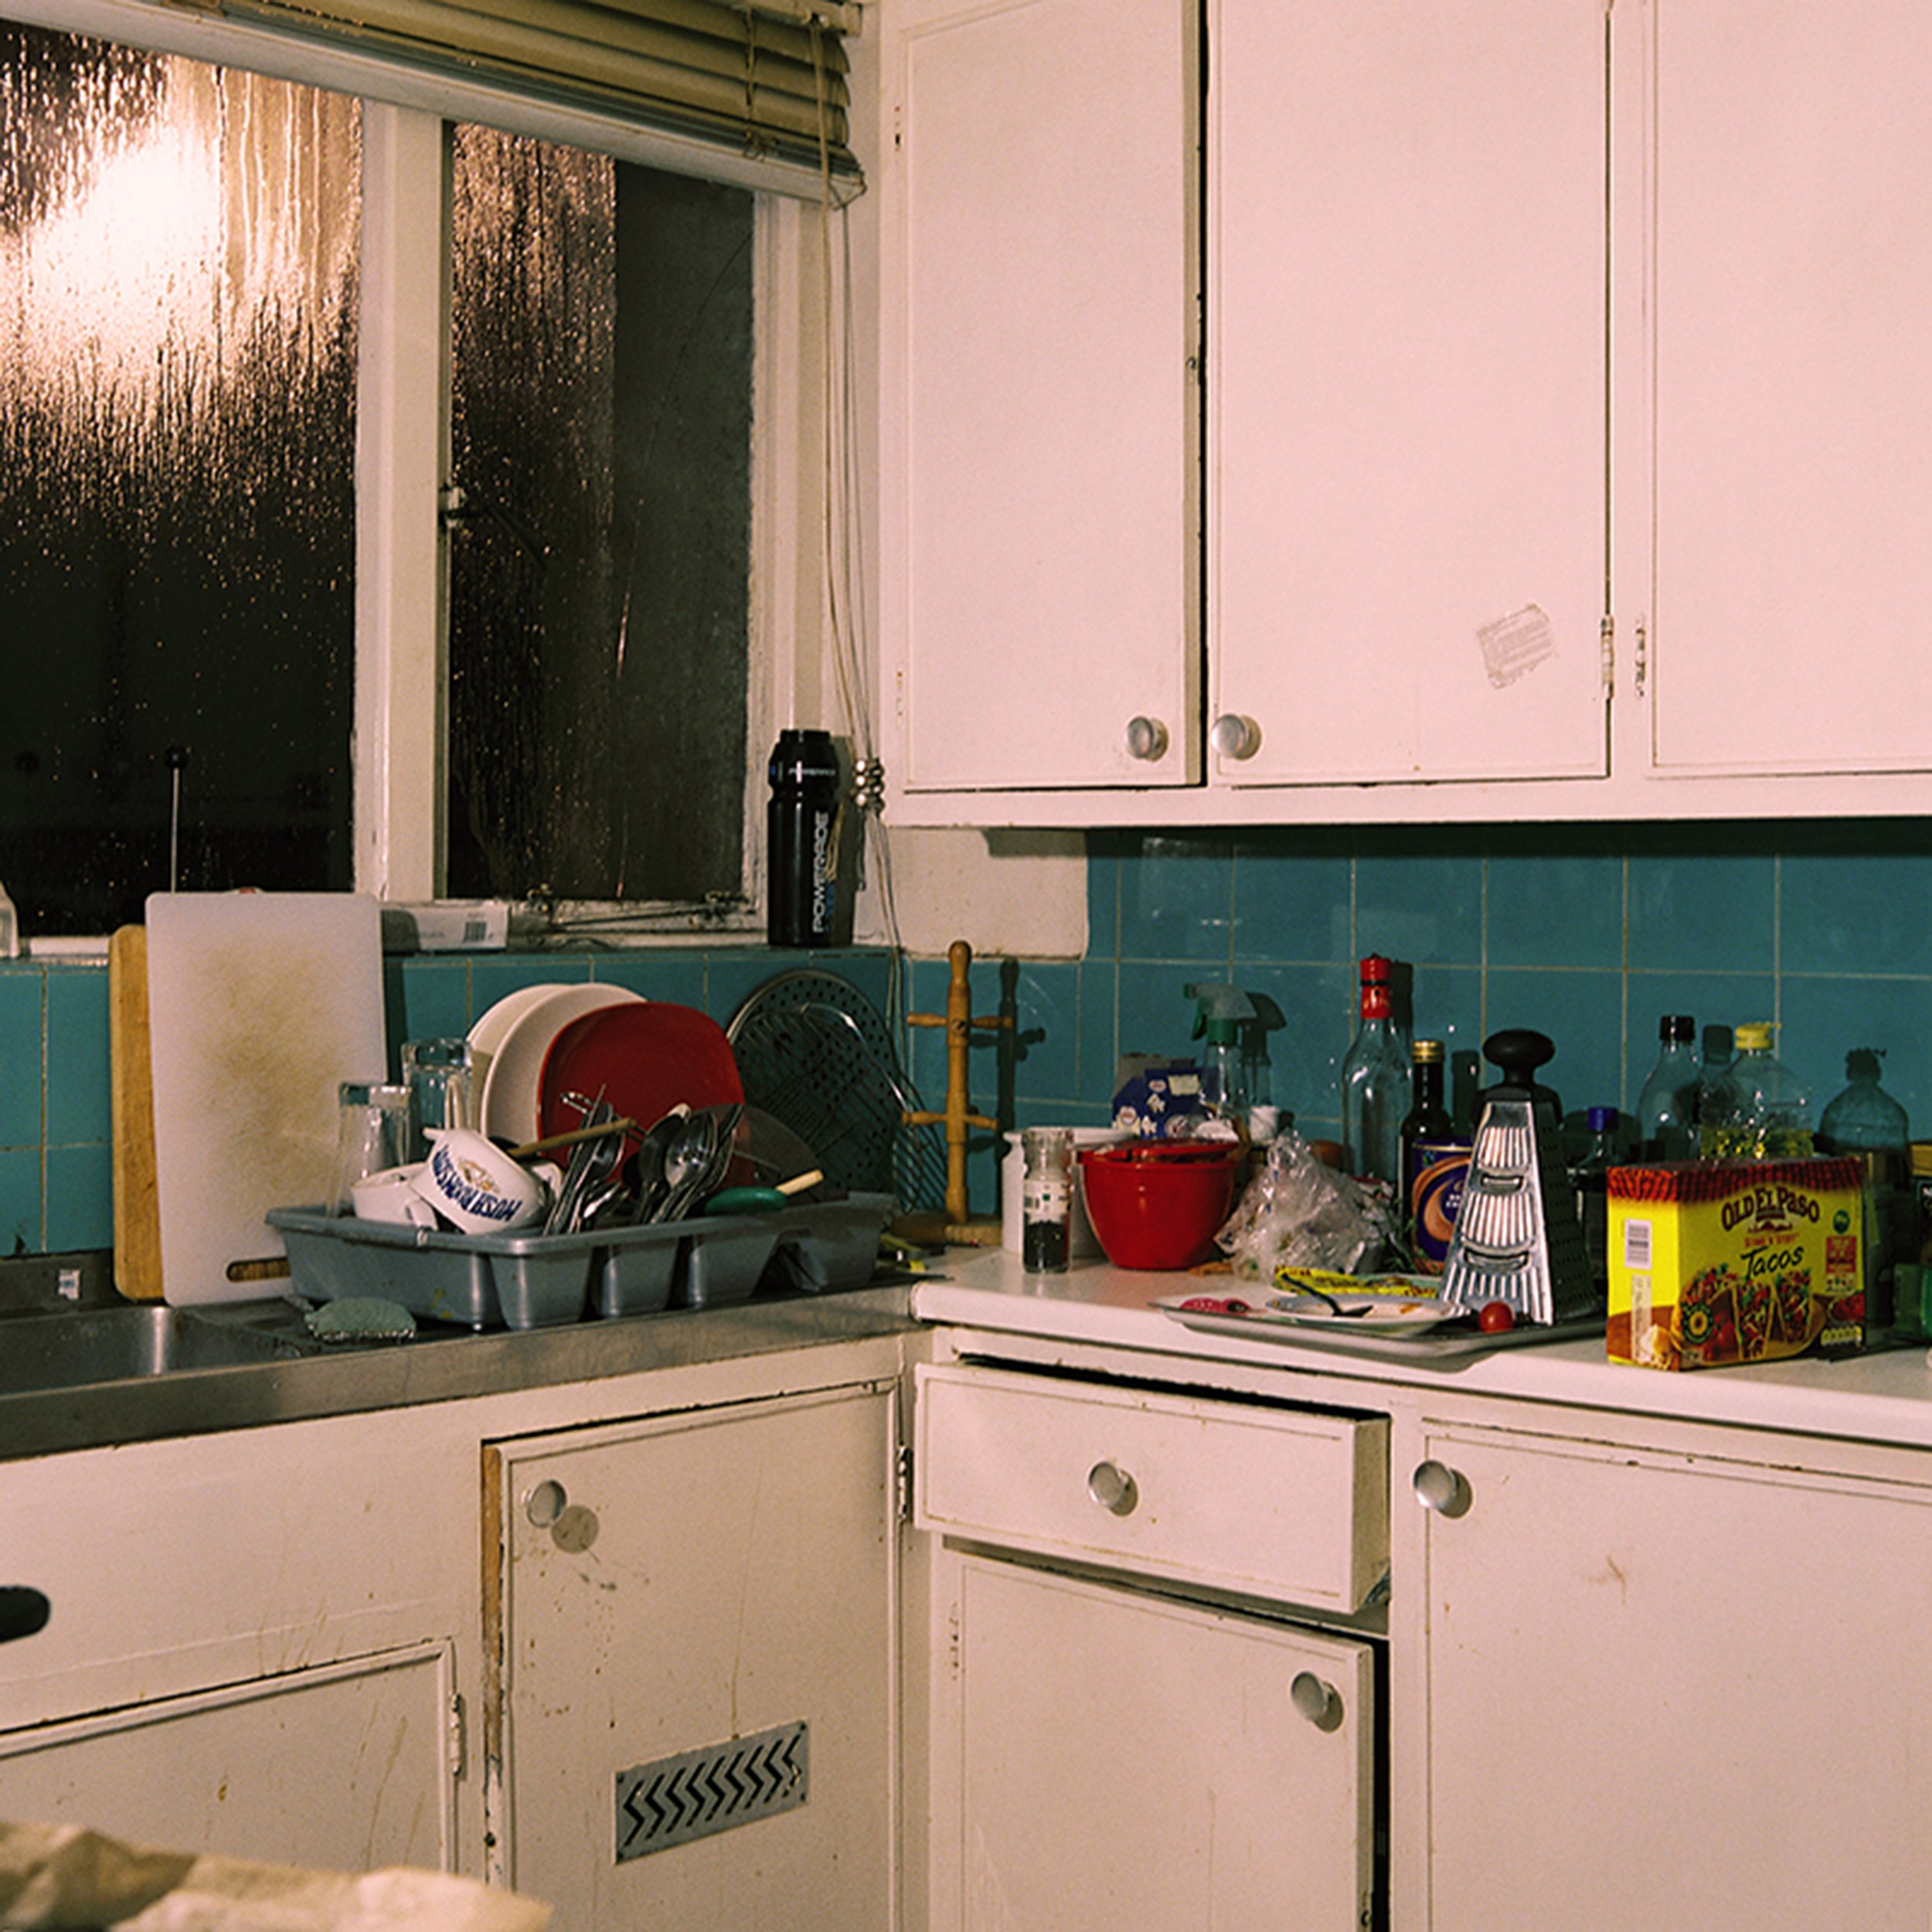 'The Kitchen' from the series 'Church Road' © Emma McGuire